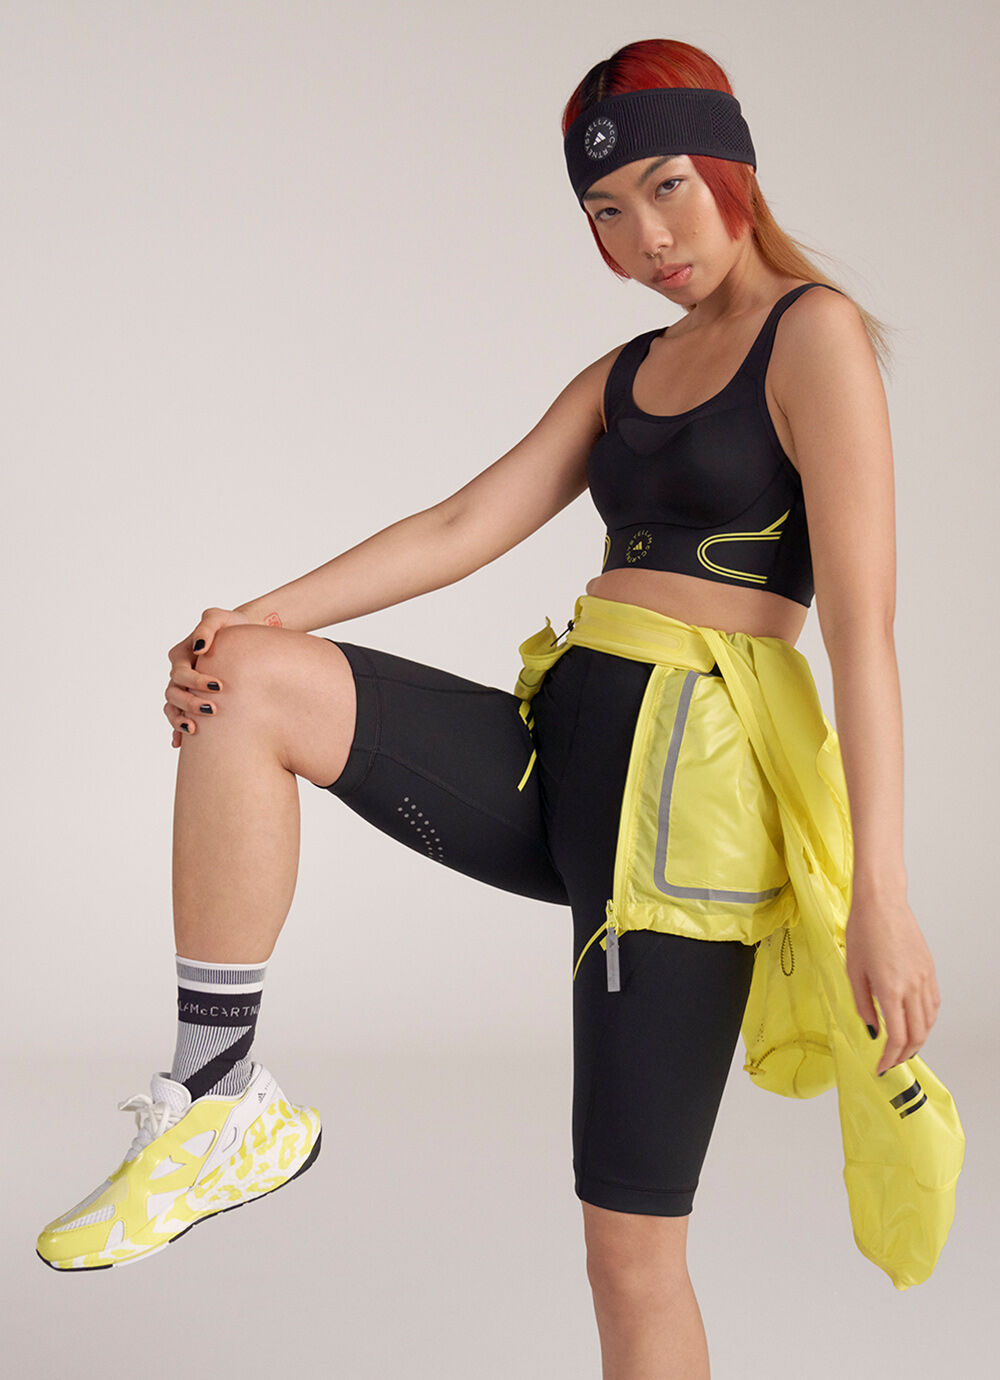 Move with purpose in adidas by Stella McCartney Autumn Winter 2022